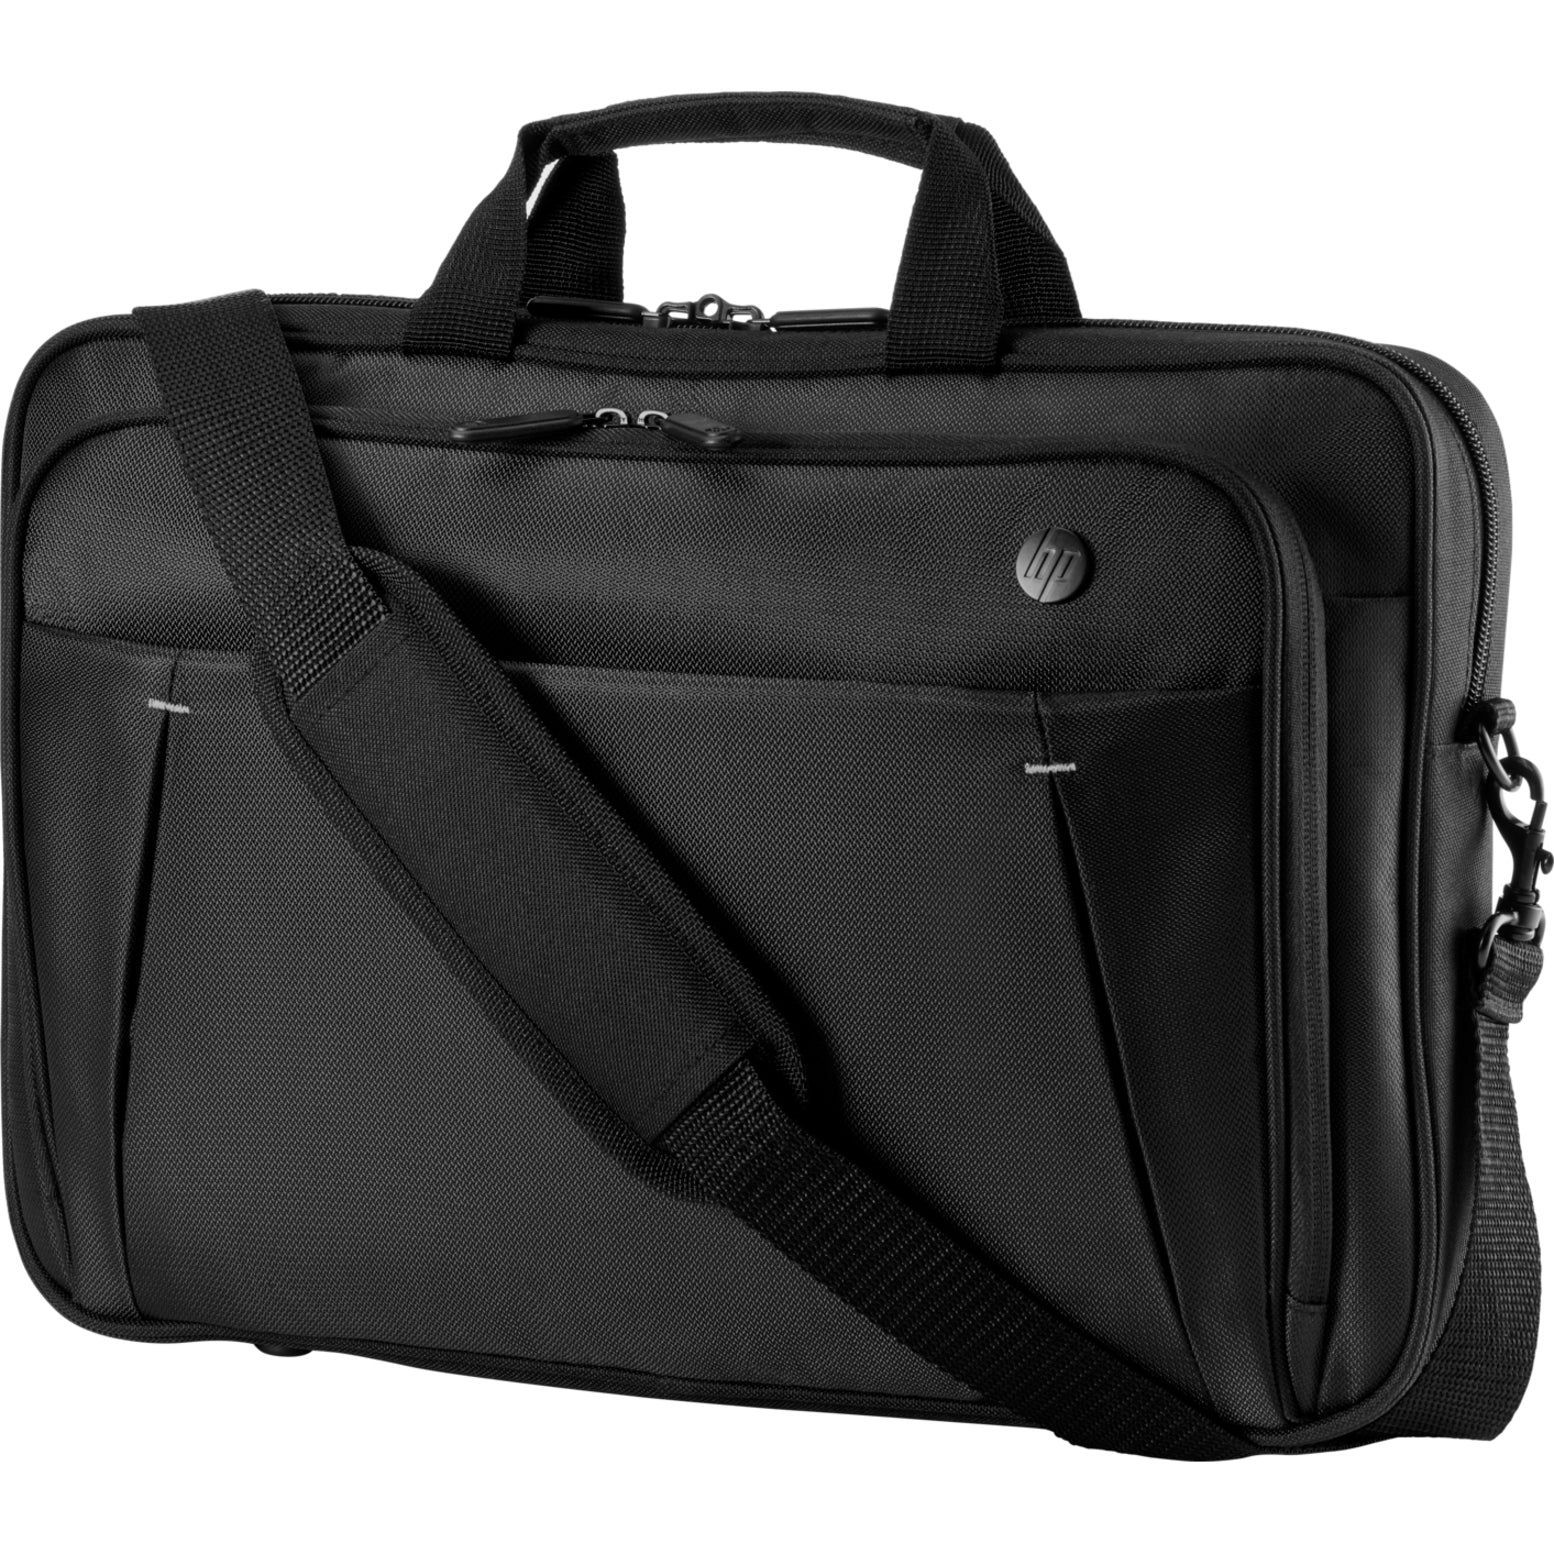 HP 2SC66AA 15.6 Business Top Load Carrying Case, Black